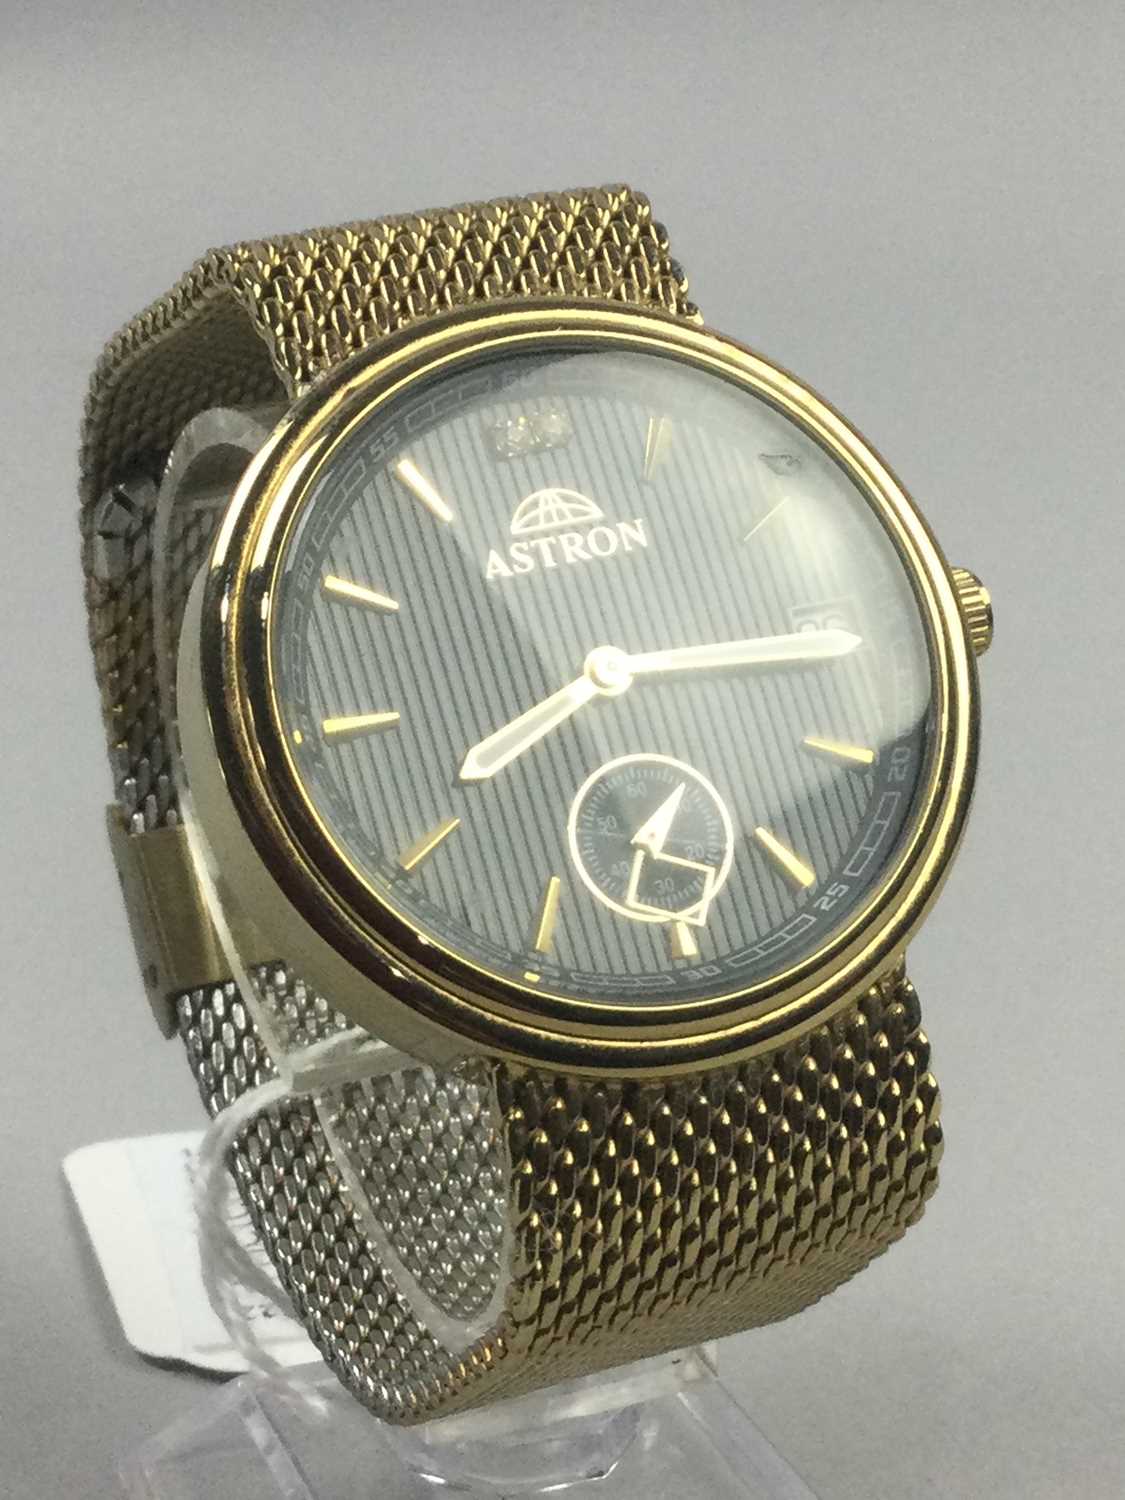 Lot 6 - A GENT'S GOLD PLATED ASTRON WRIST WATCH